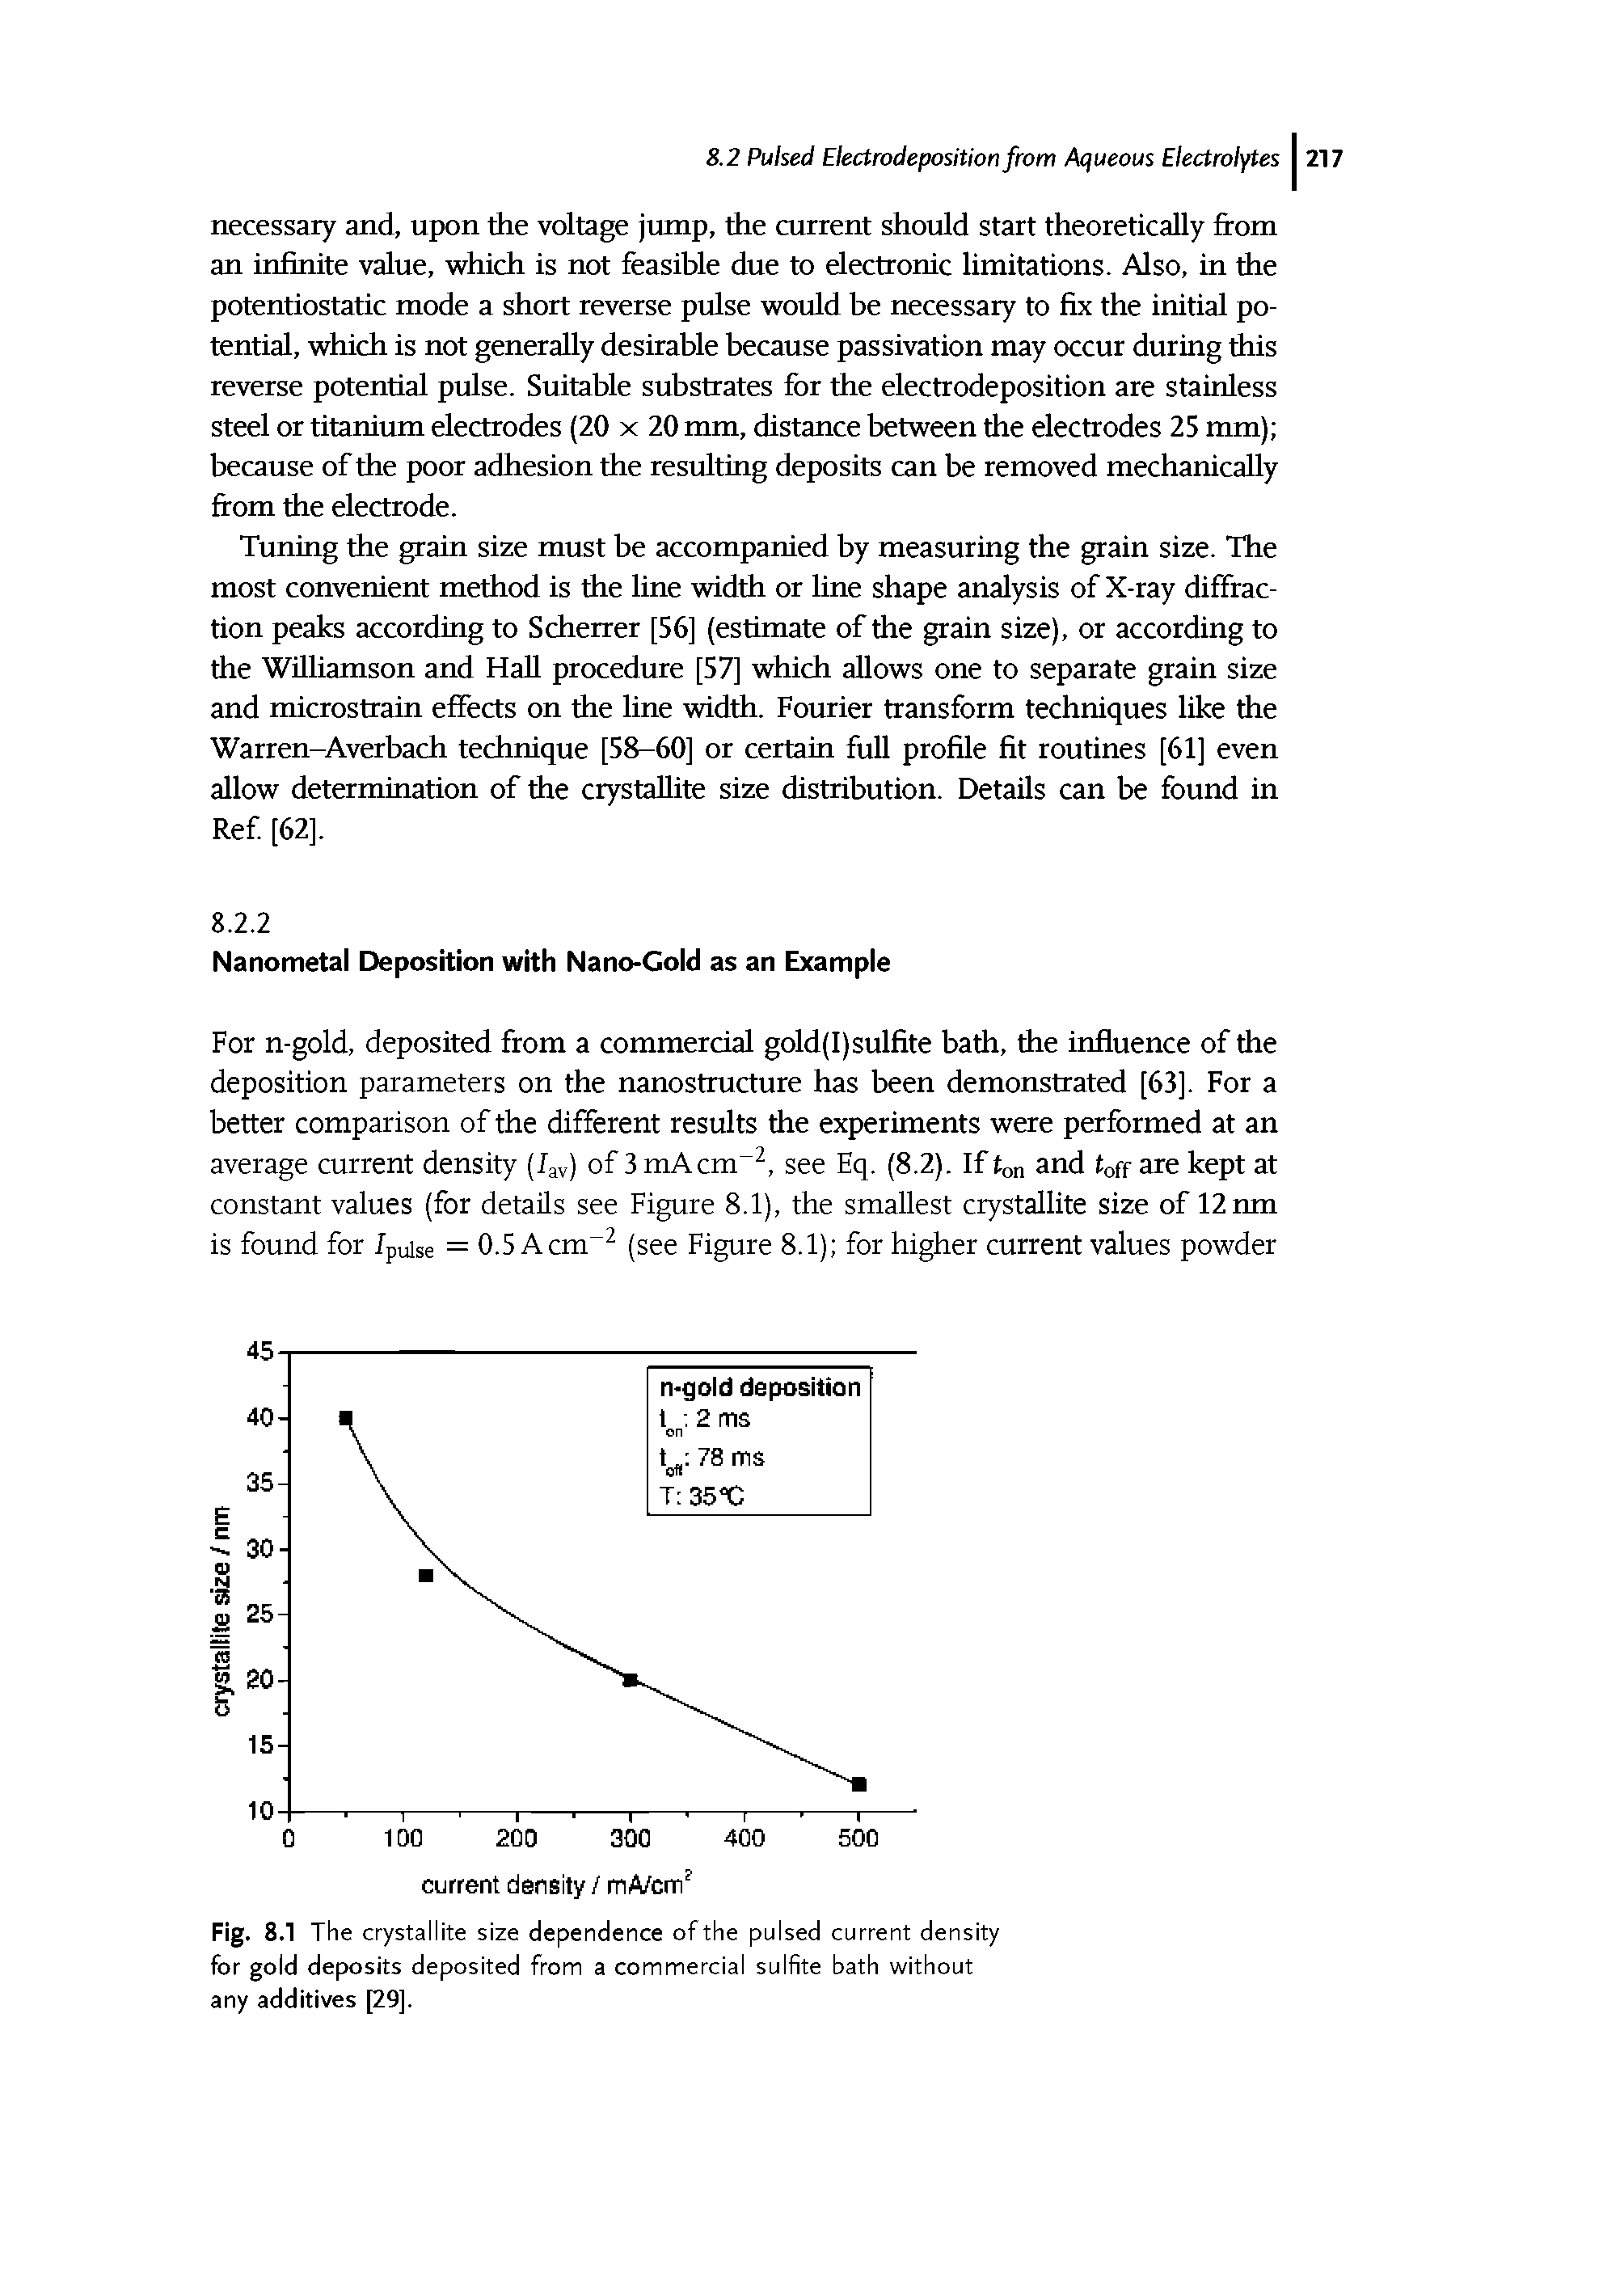 Fig. 8.1 The crystallite size dependence of the pulsed current density for gold deposits deposited from a commercial sulfite bath without any additives [29].